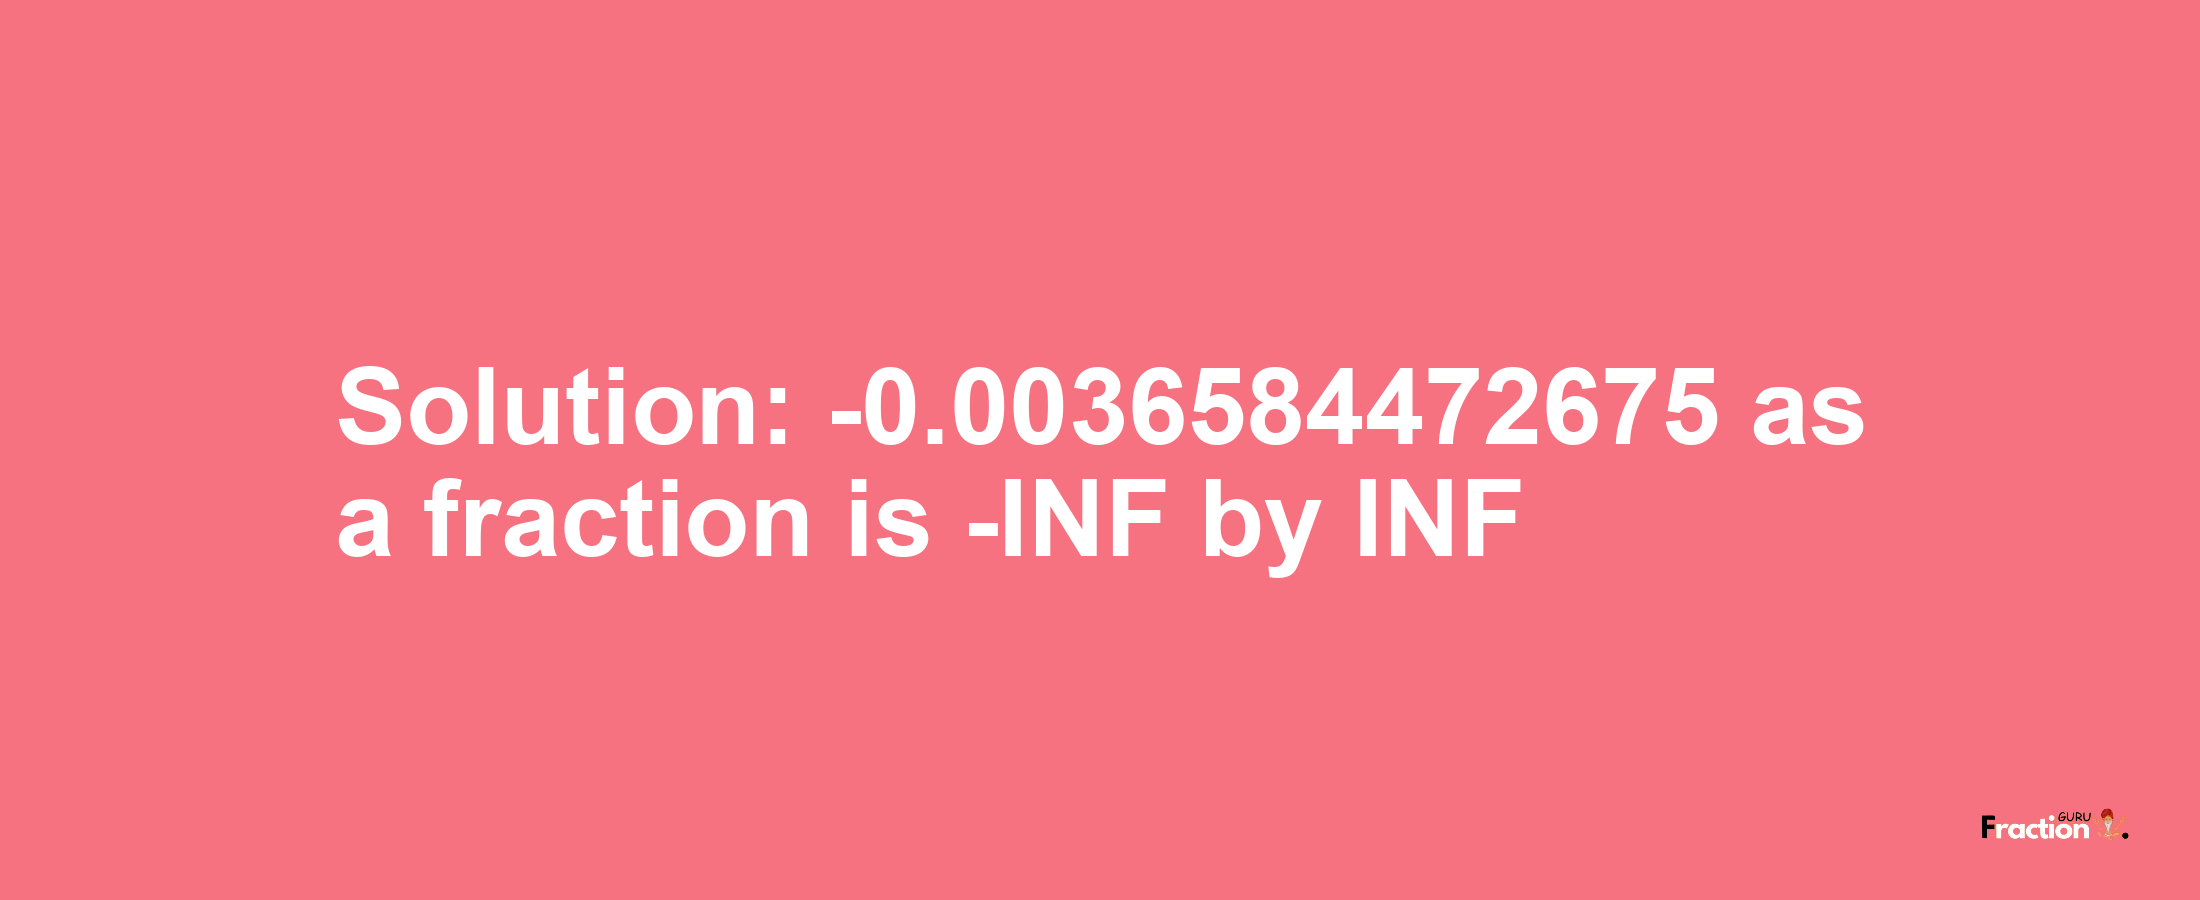 Solution:-0.0036584472675 as a fraction is -INF/INF